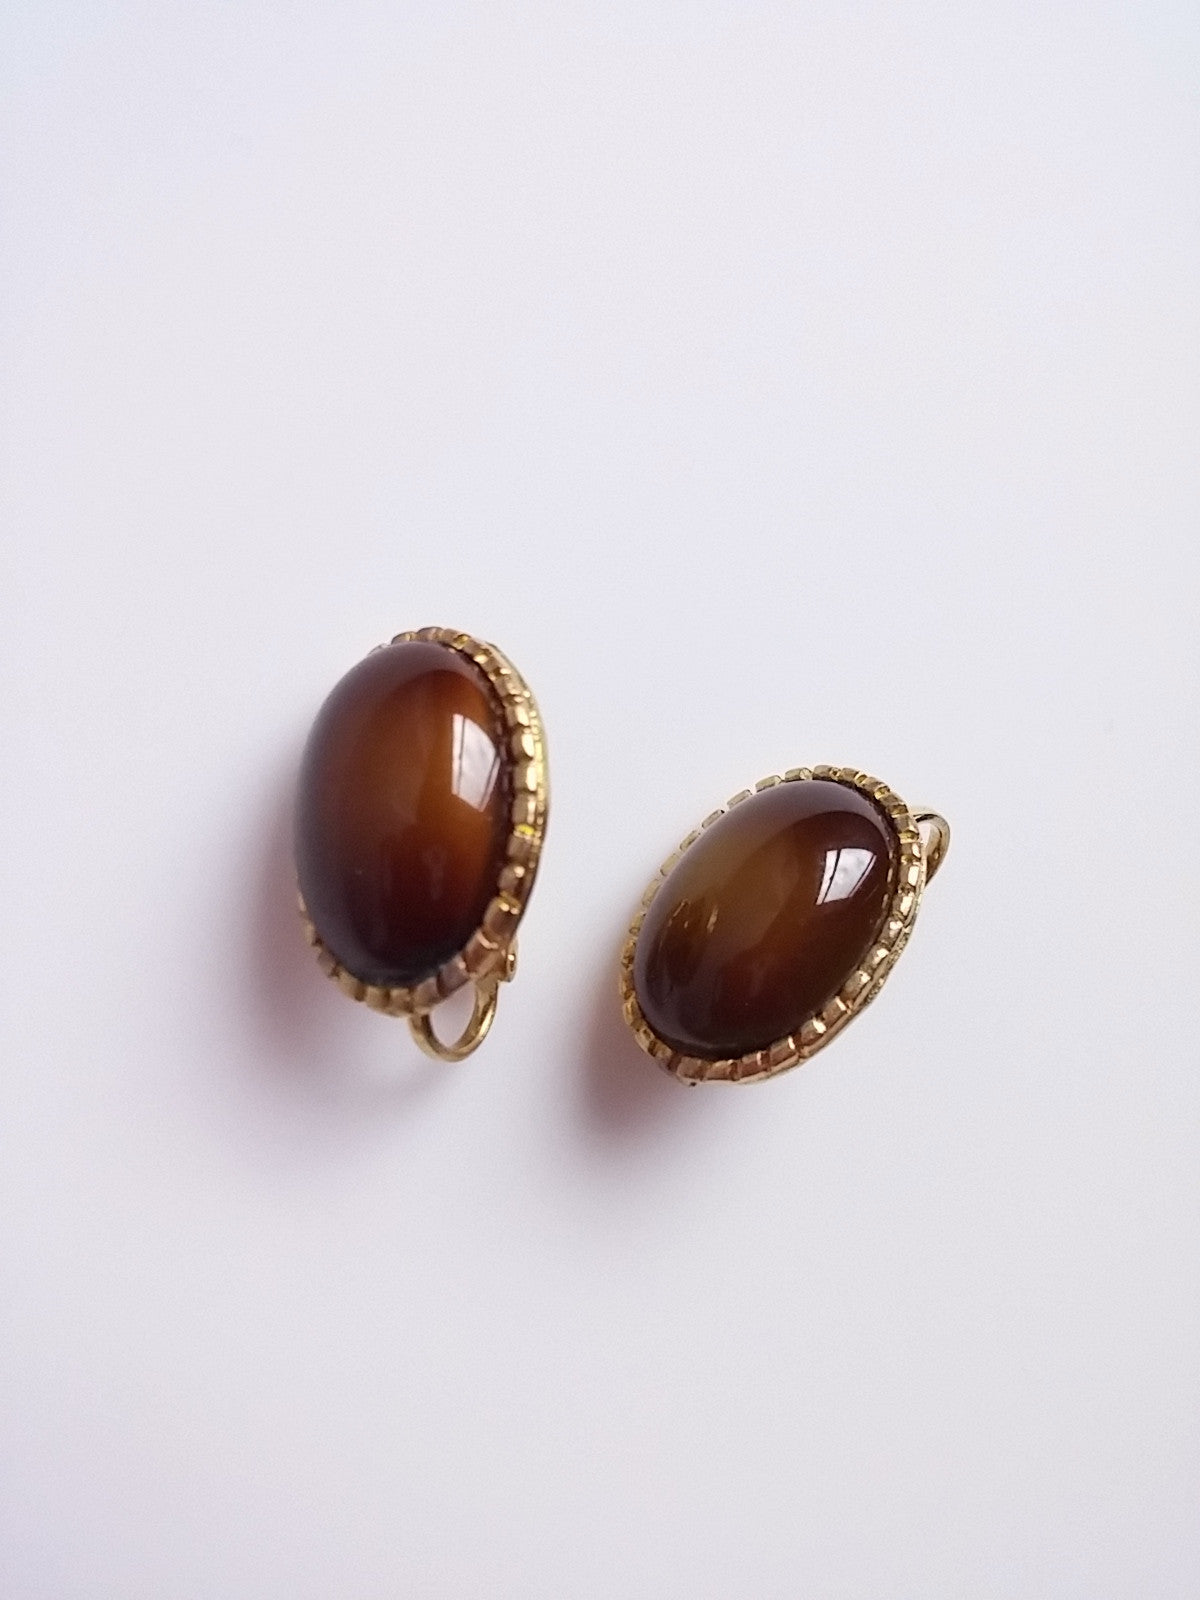 Vintage Earrings Oval Shaped Brown Center Stone - Dirty 30 Vintage | Vintage Clothing, Vintage Jewelry, Vintage Accessories